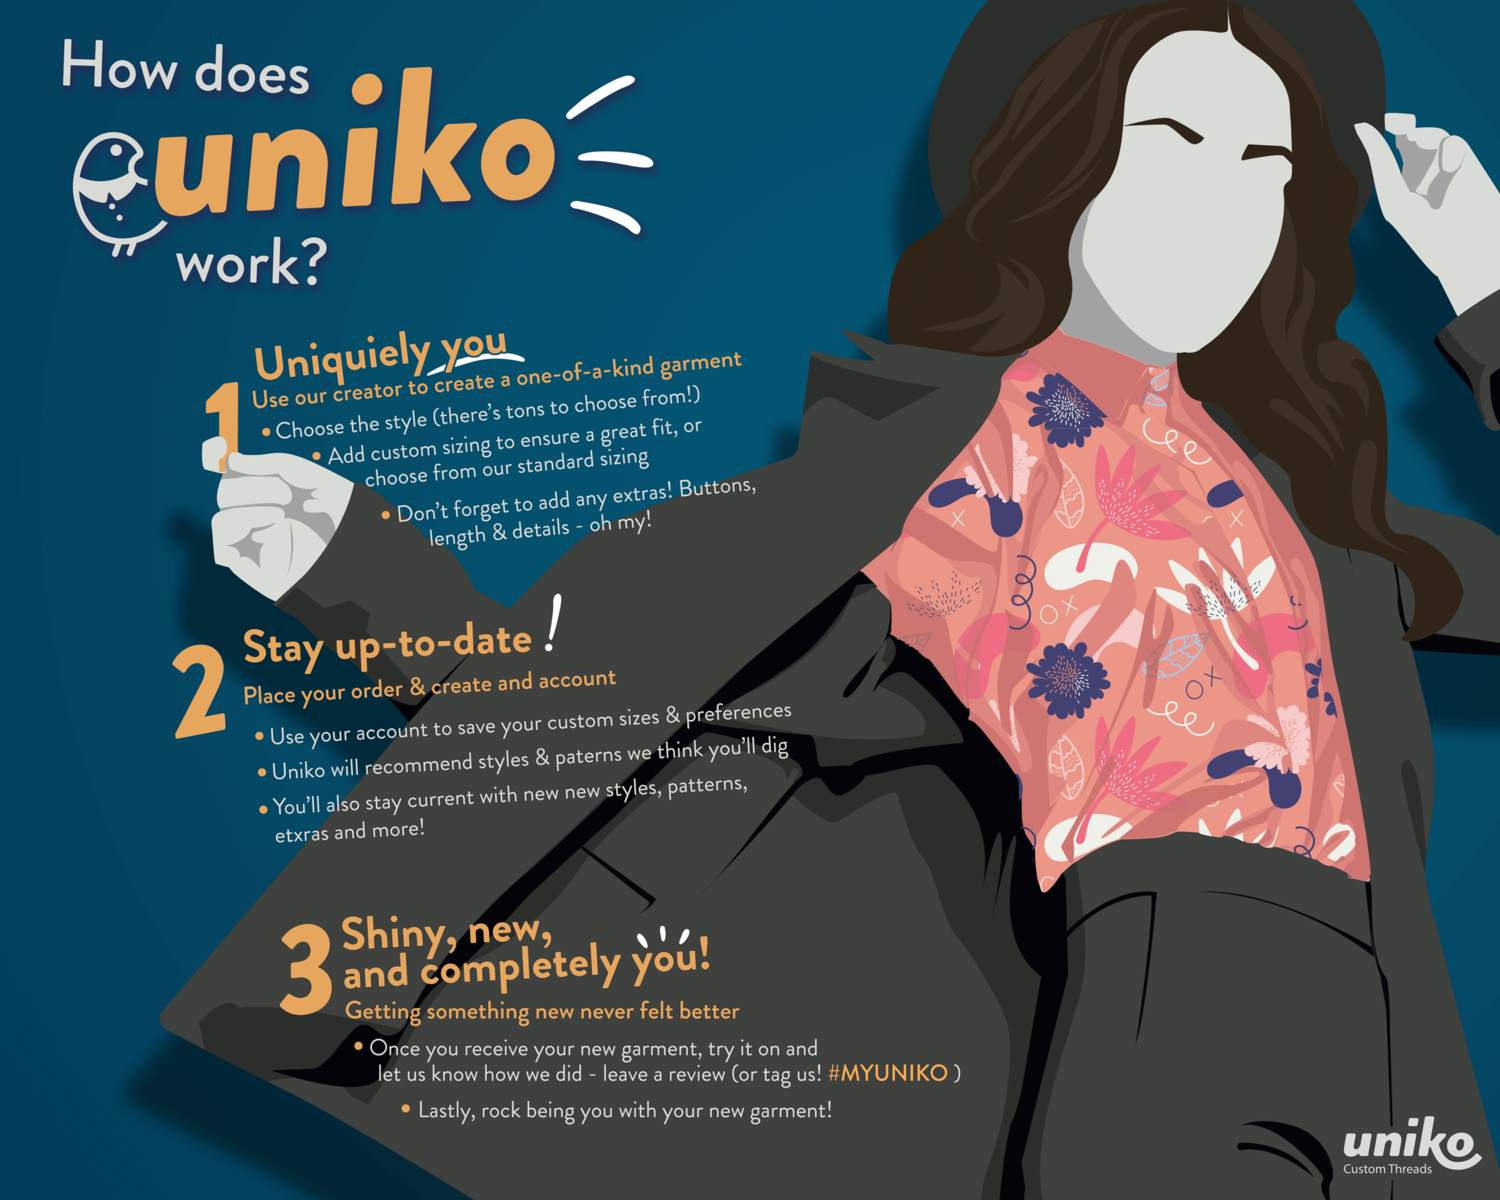 How does Uniko Work? / 24” x 30” / A poster that describes the process or ordering a custom garment with Uniko